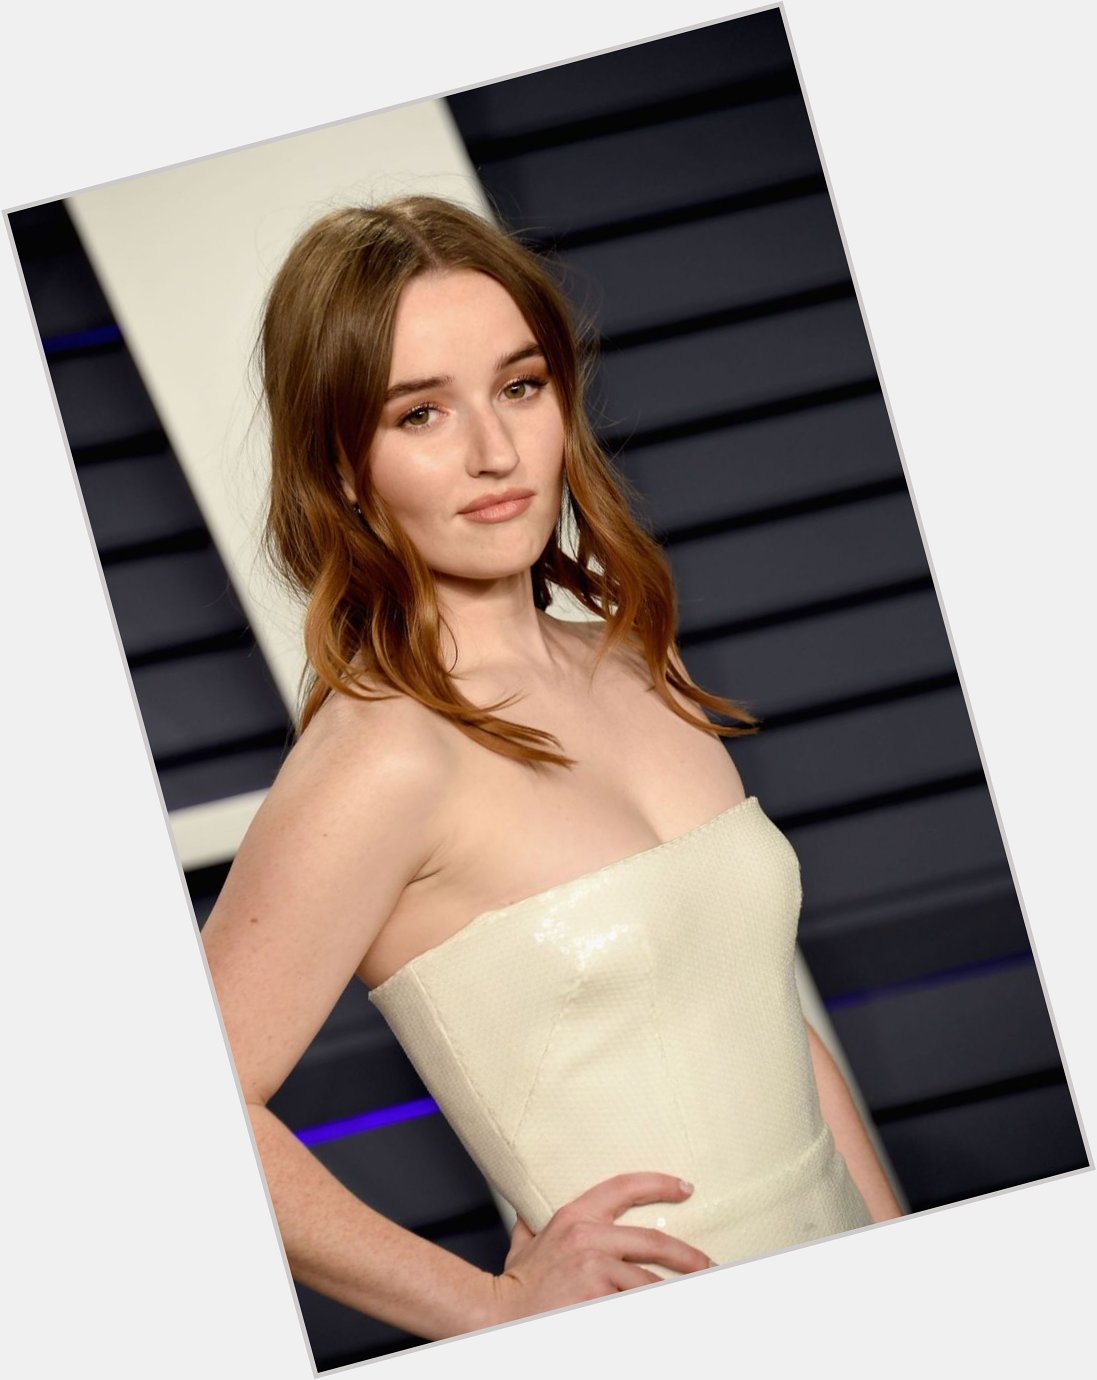 Let\s start the winter off right by wishing the cute Kaitlyn Dever a Happy 24th Birthday!! 